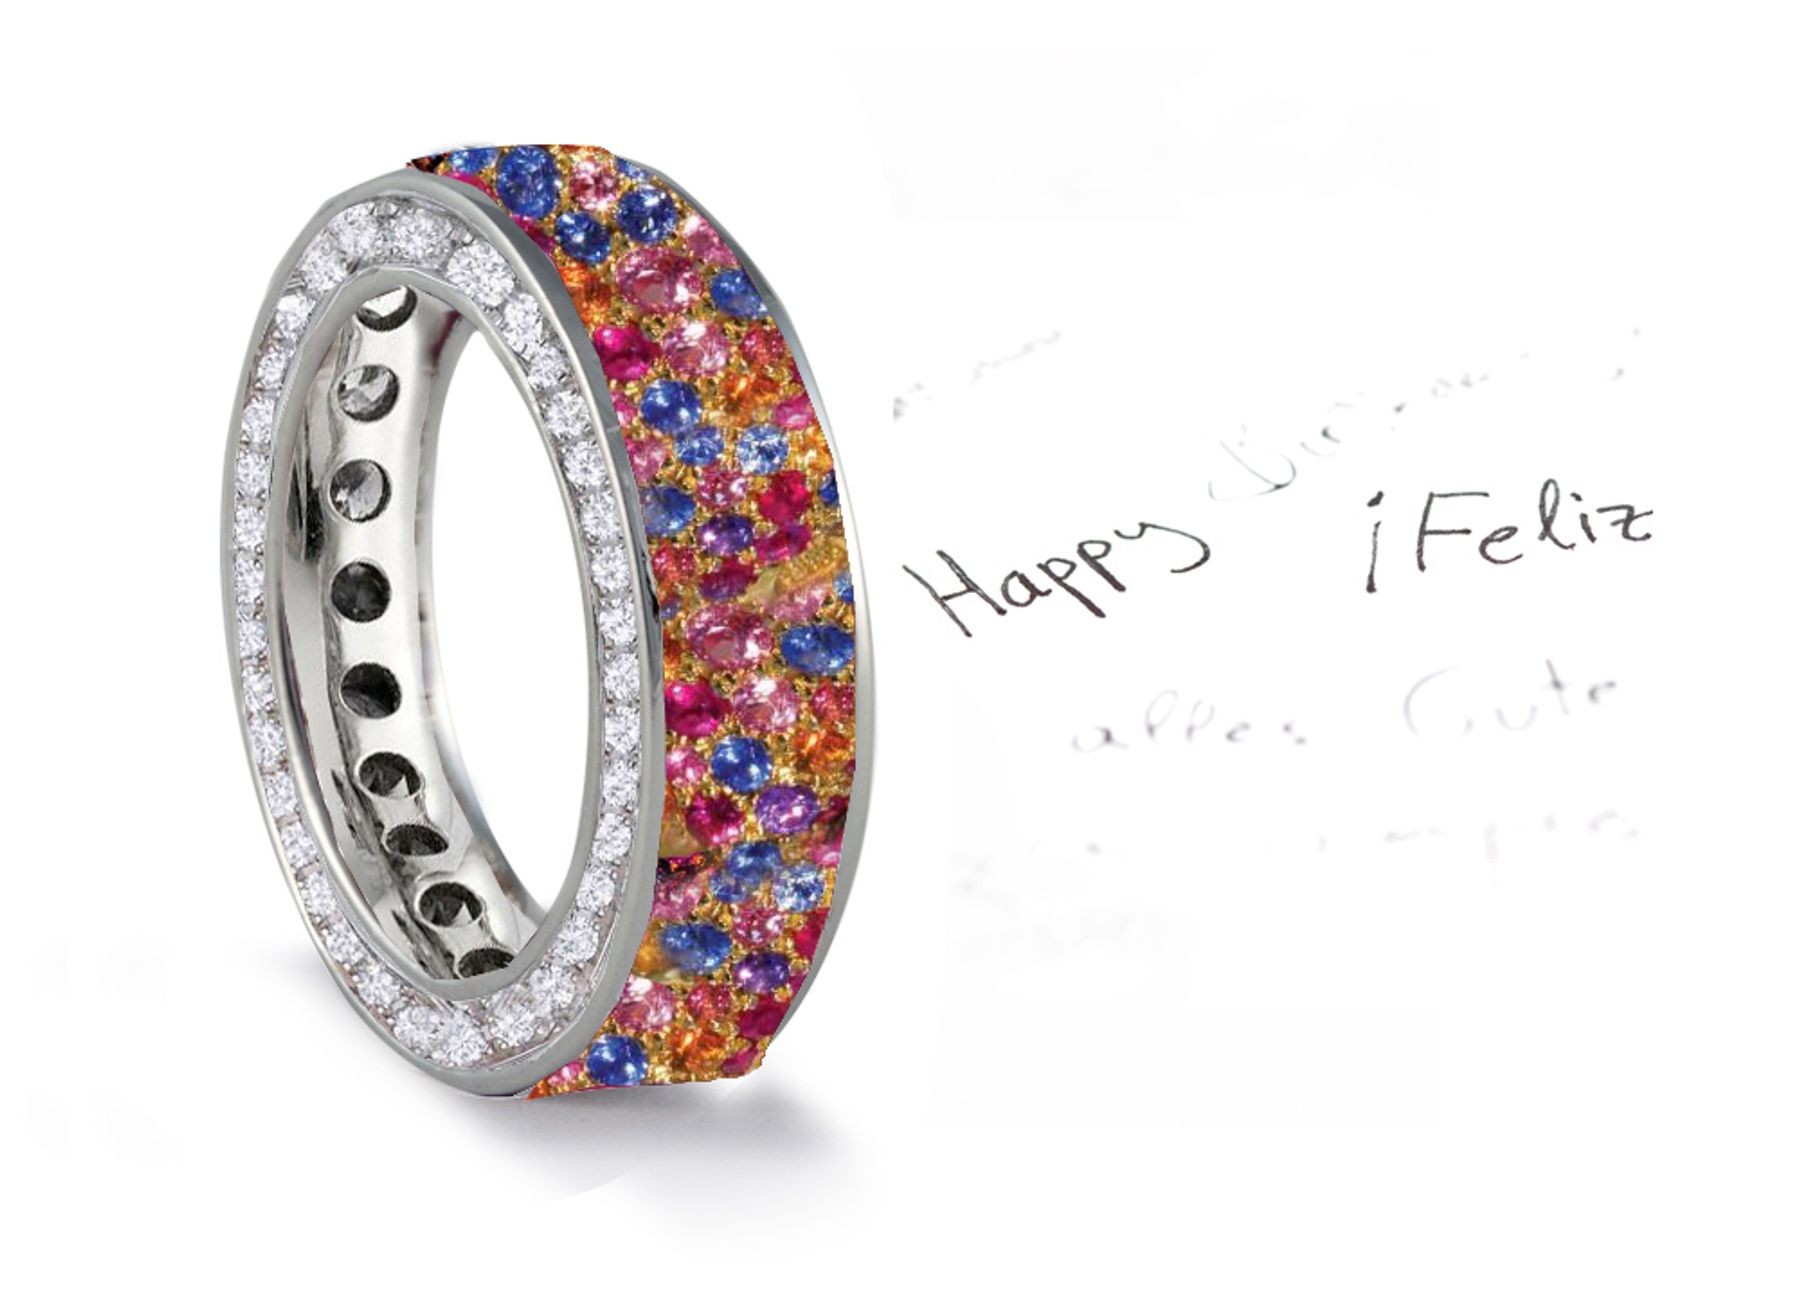 Made to Order French pave Set Brilliant Cut Round Diamonds & Multi Colored Sapphires Eternity Rings & Bands